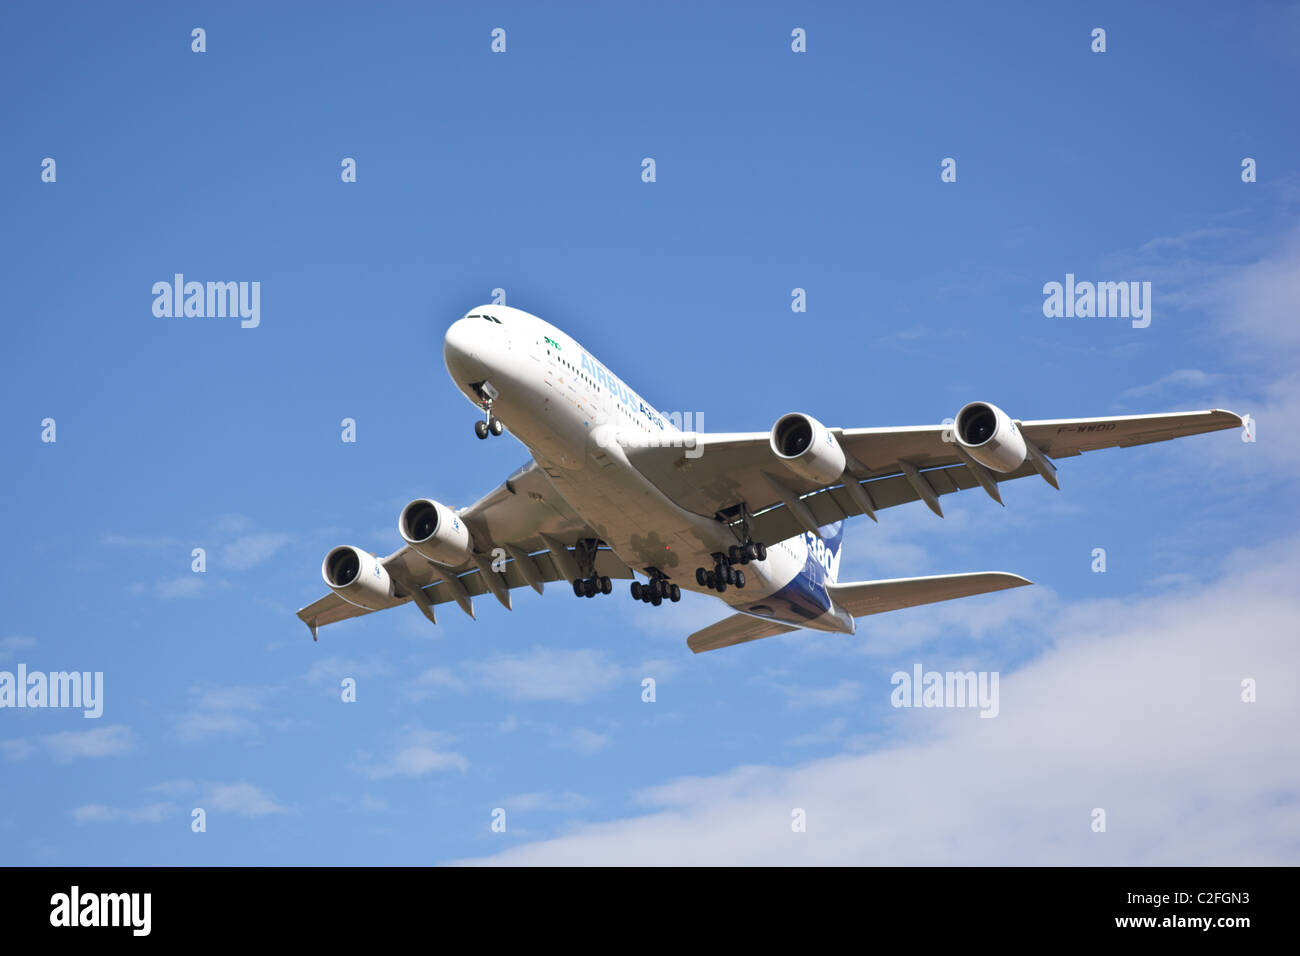 Airbus A380 in flight with landing gear down. Stock Photo